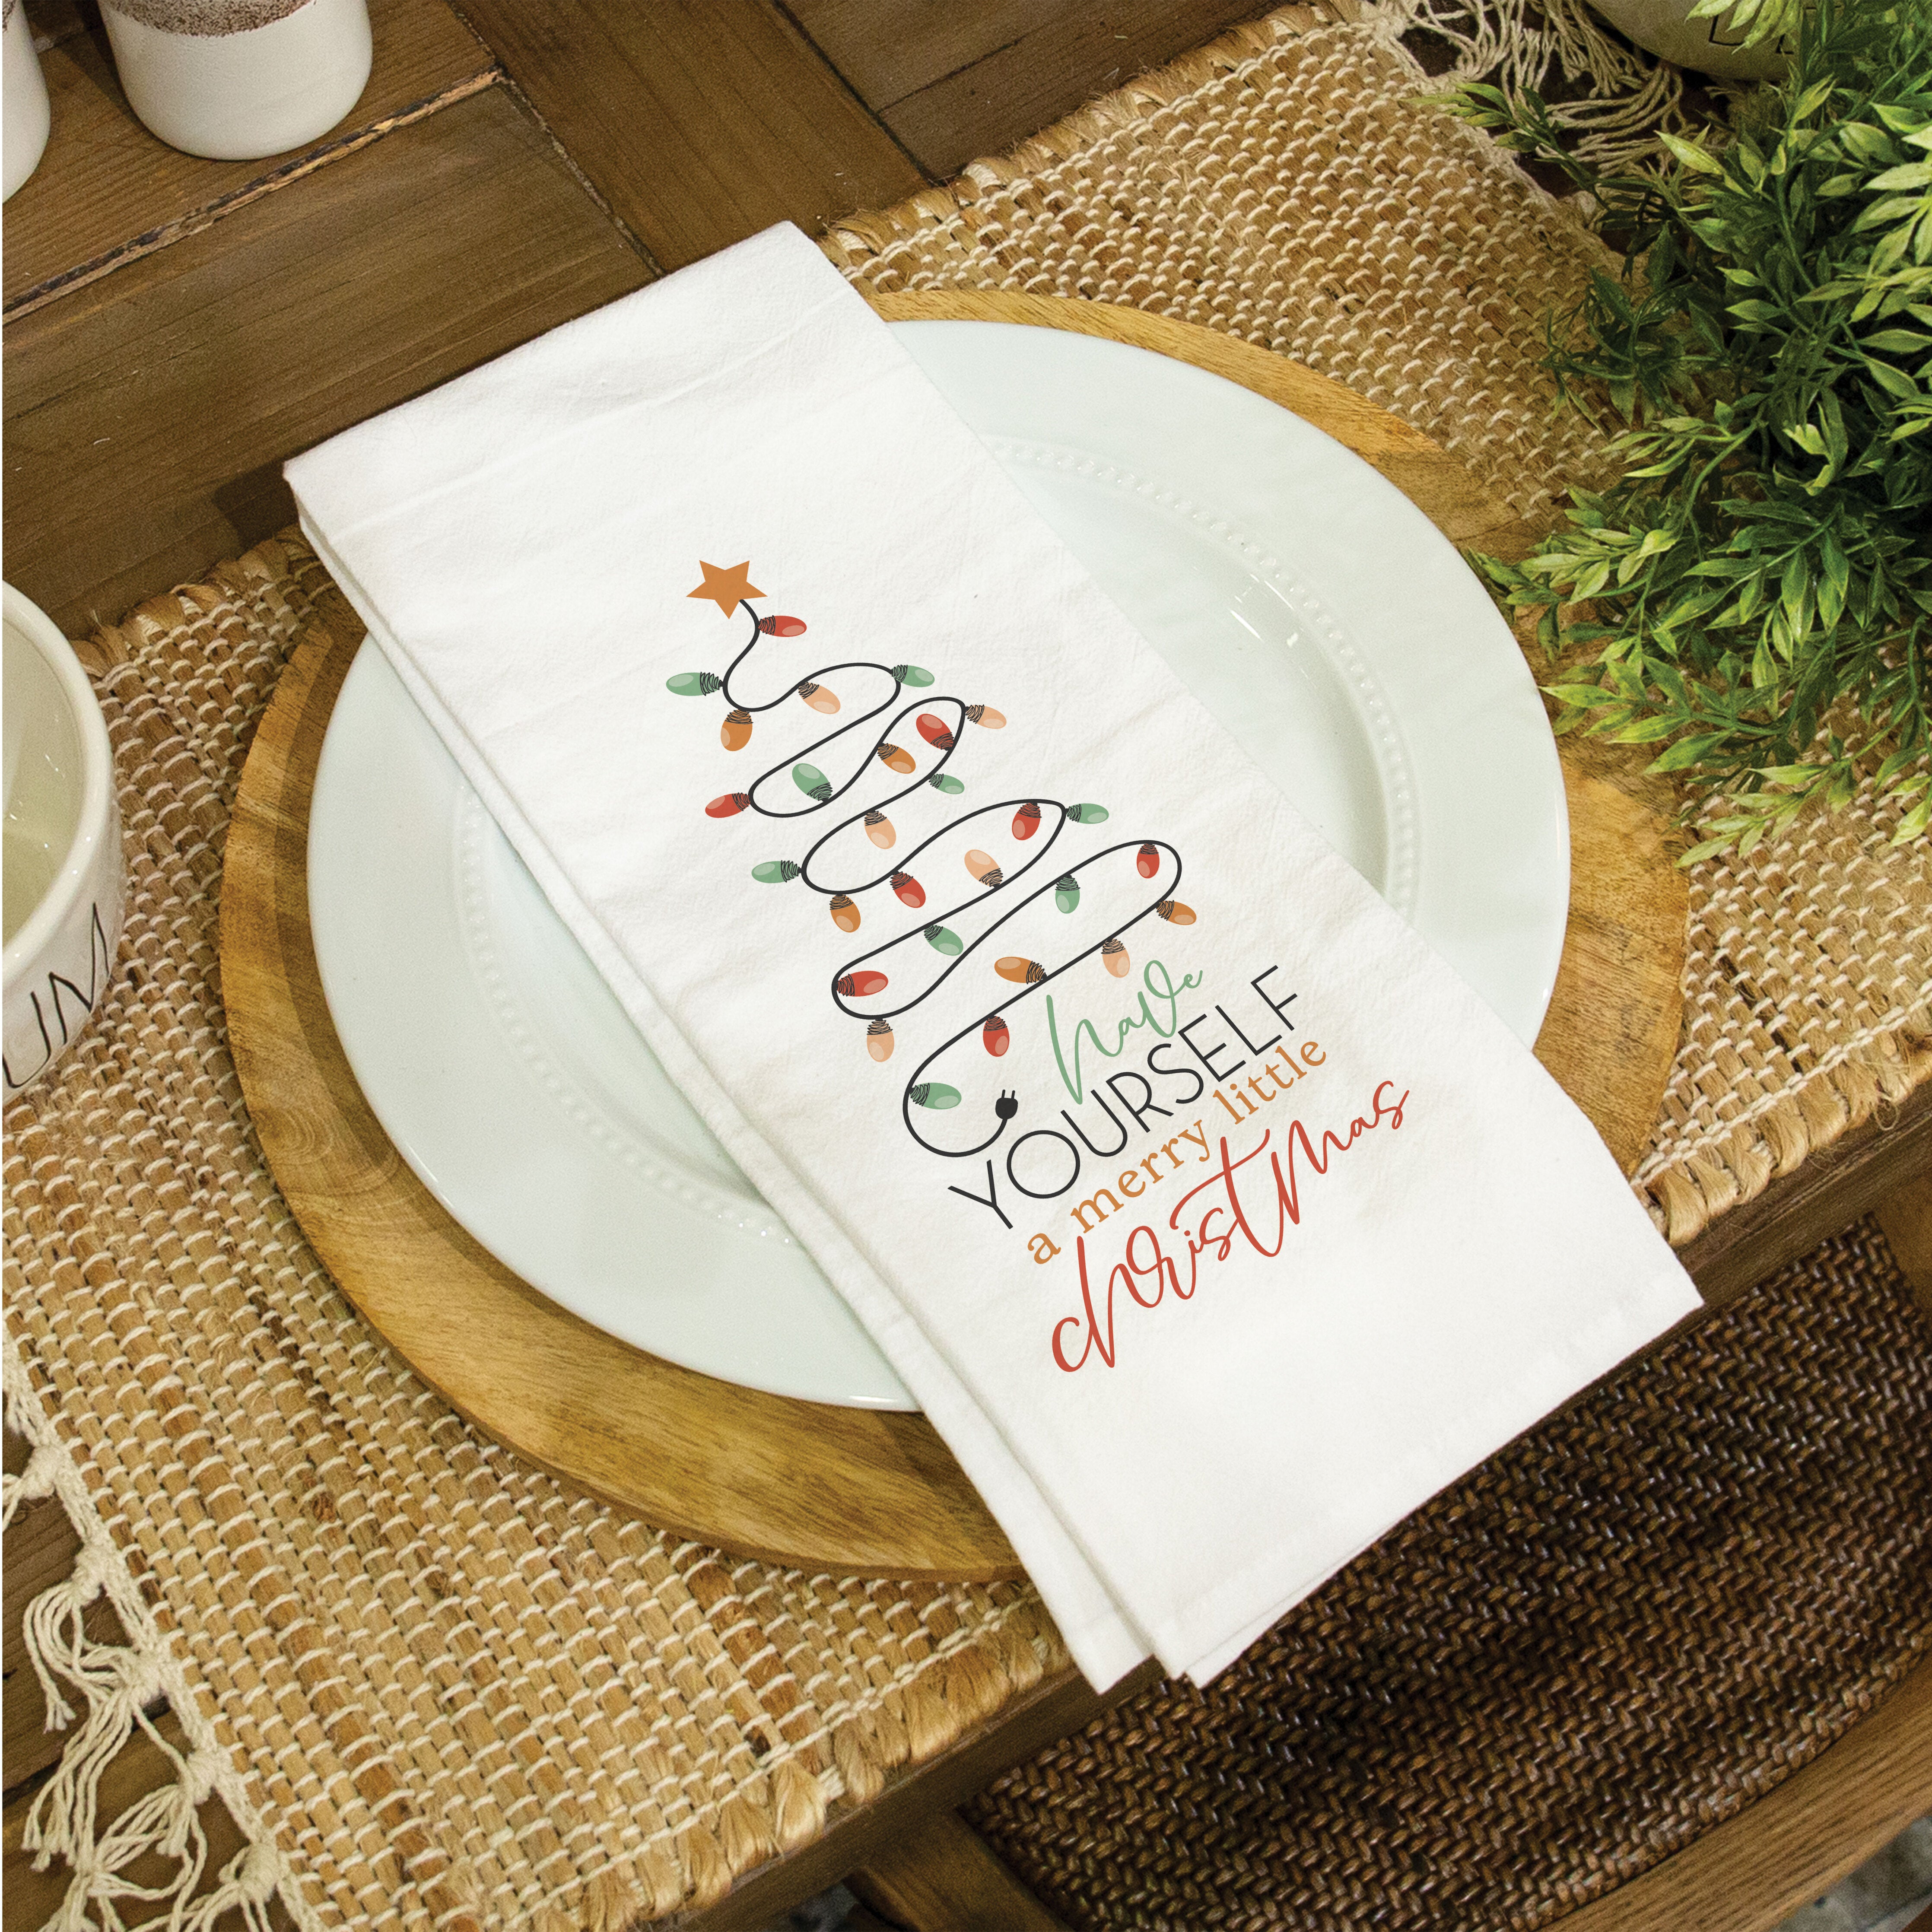 Have Yourself A Merry Little Christmas Tea Towel